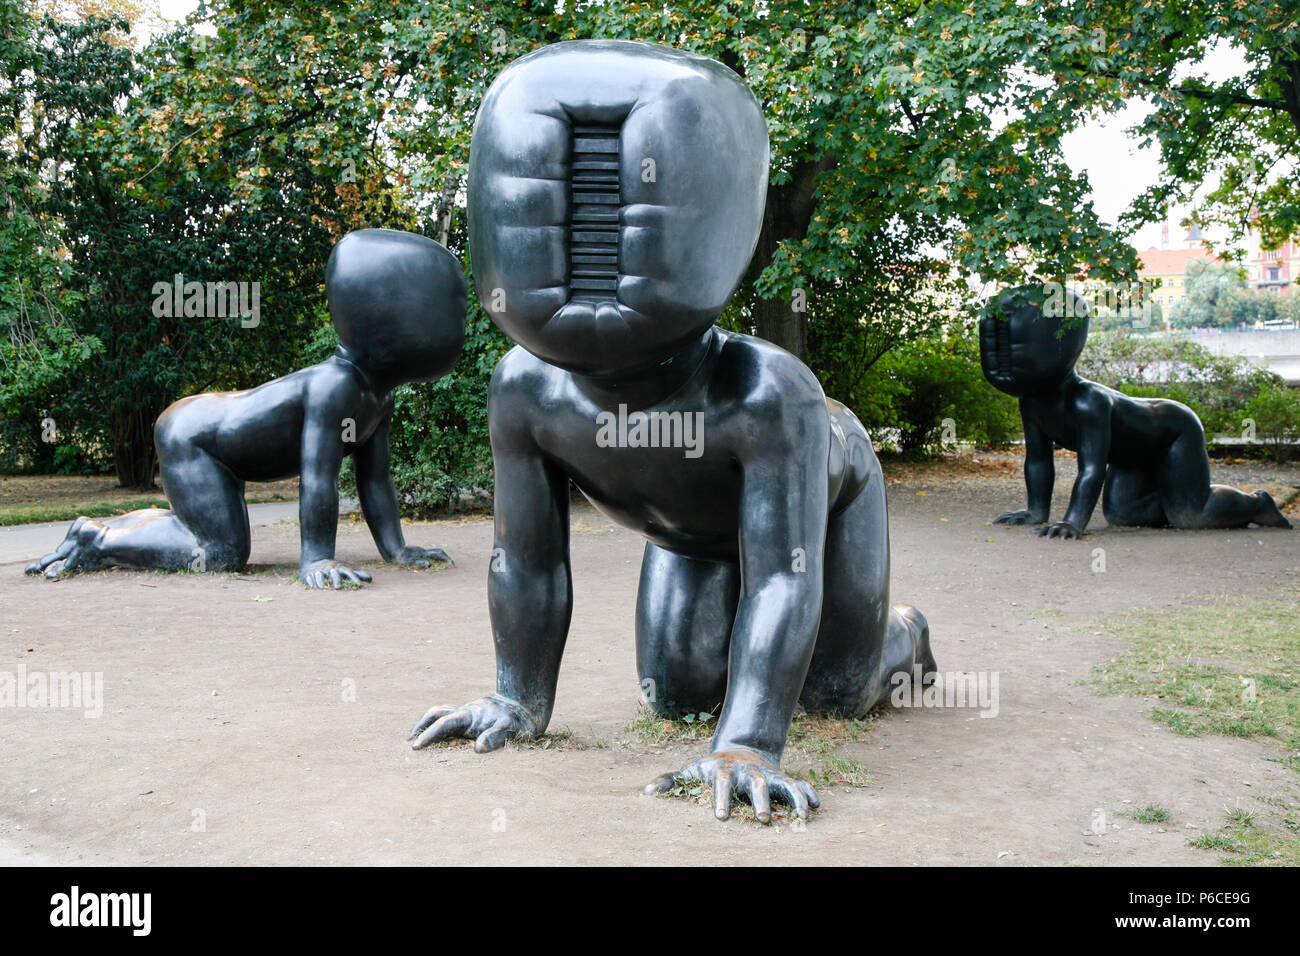 Three large crawling bronze babies sculptures in front of the Museum of Modern Art in Kampa Park, Prague, Czech Republic. Stock Photo